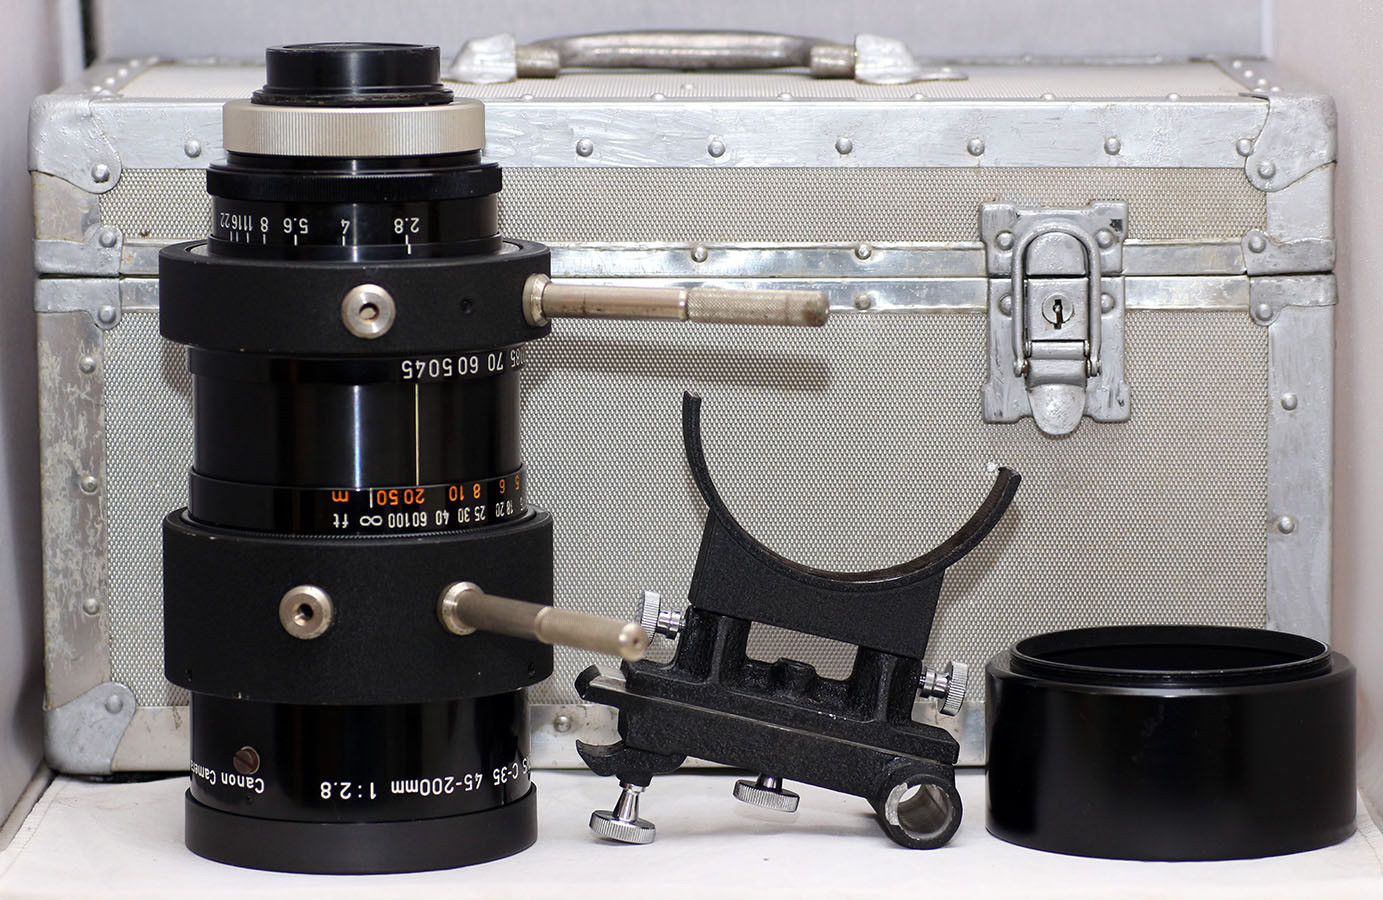 The Rarest Prototype Canon Lens on Earth Is Yours for $29,999